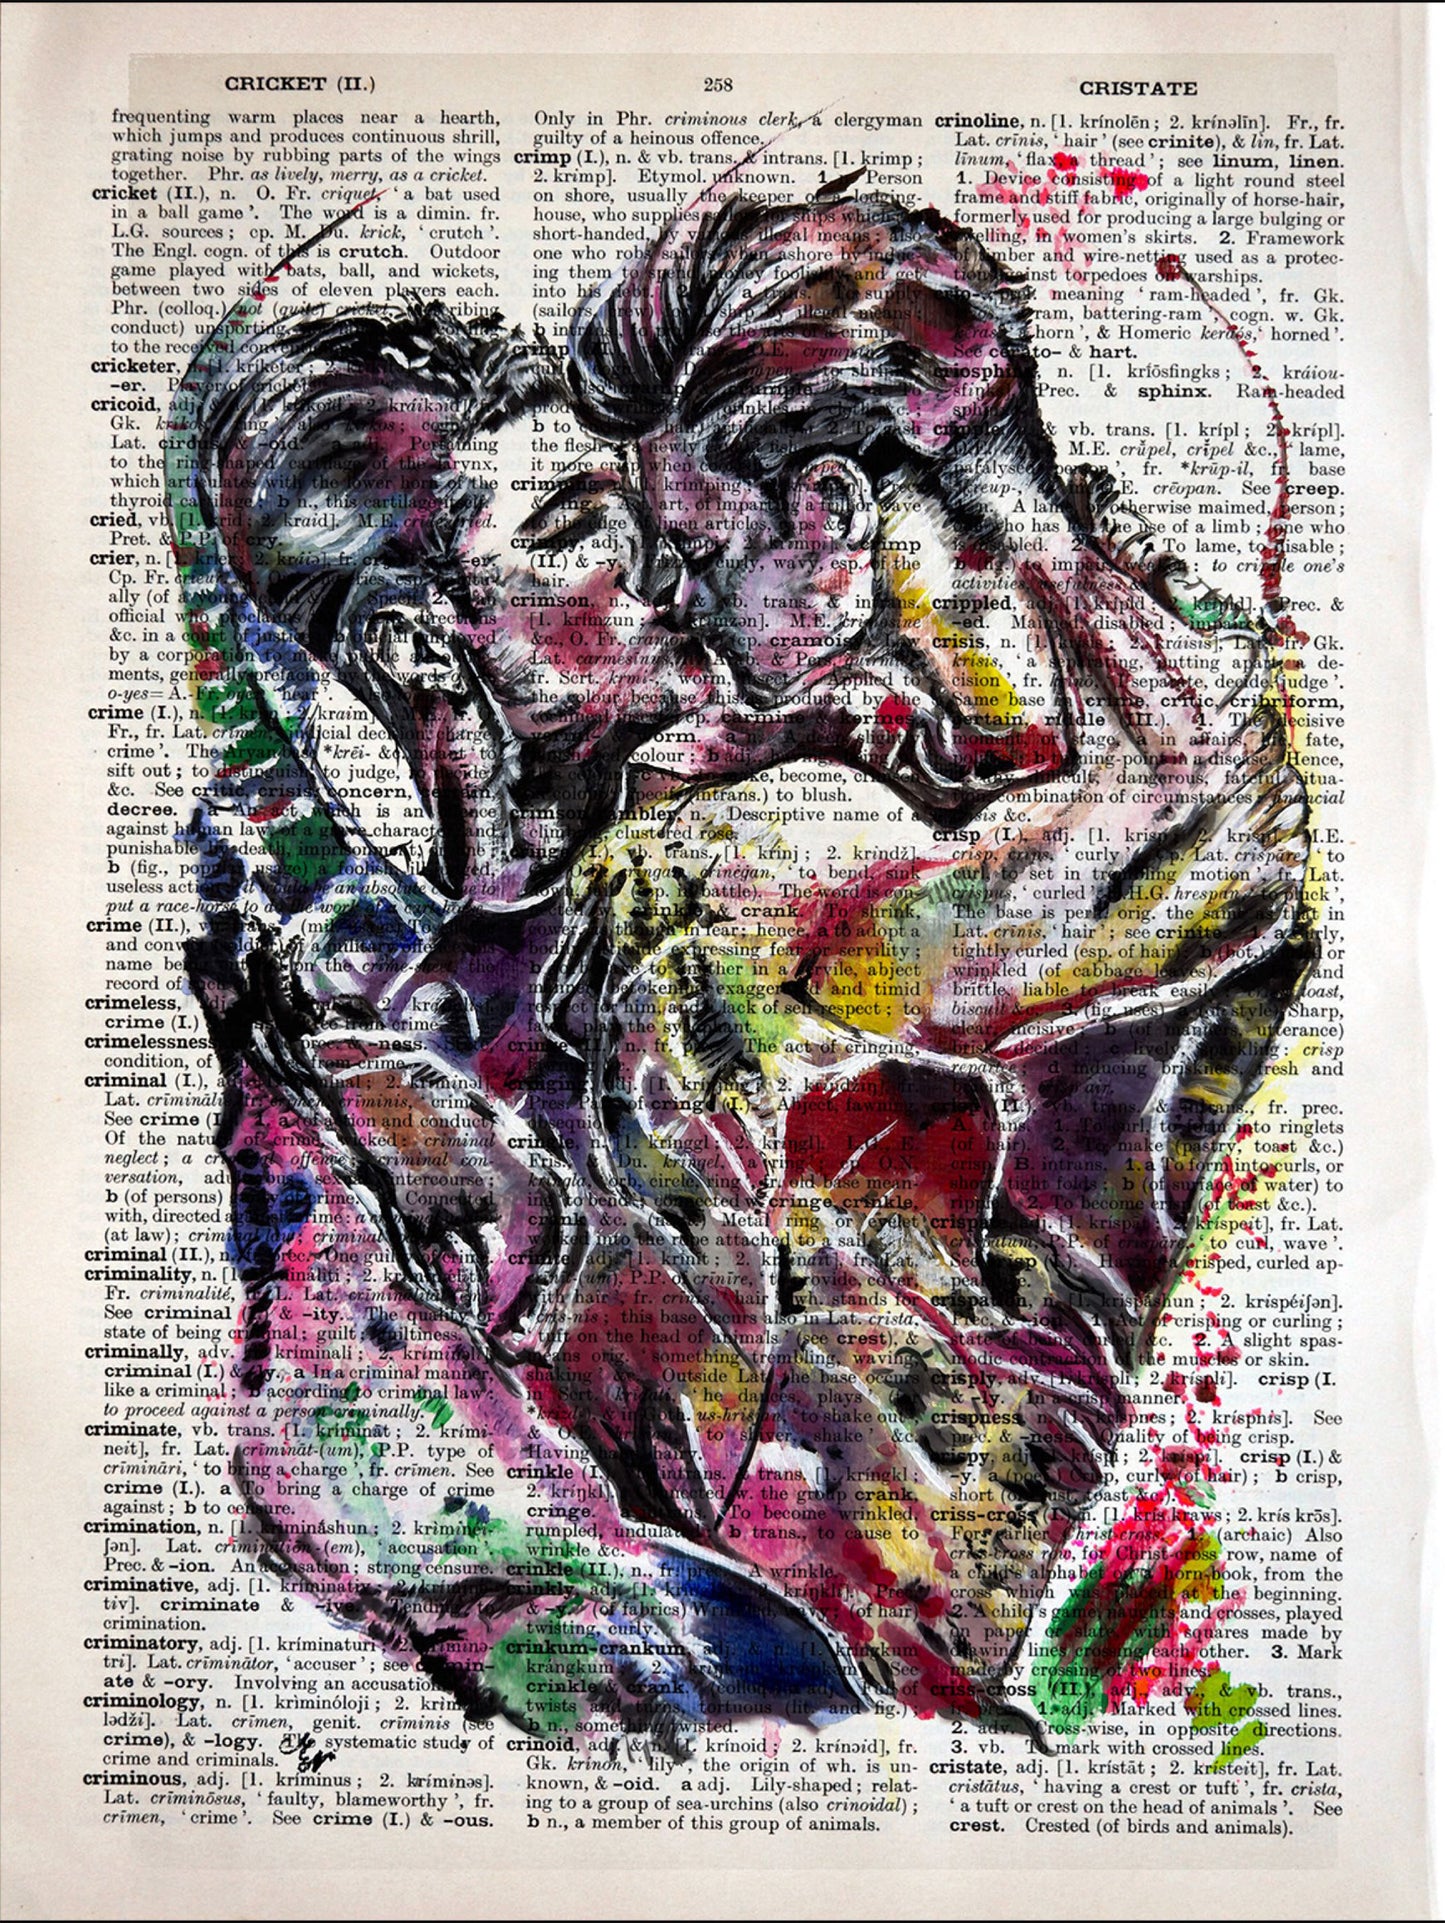 "Passionate Embrace" by Malgorzata Nierobisz: Intimate digital painting of two men kissing on a vintage dictionary page.